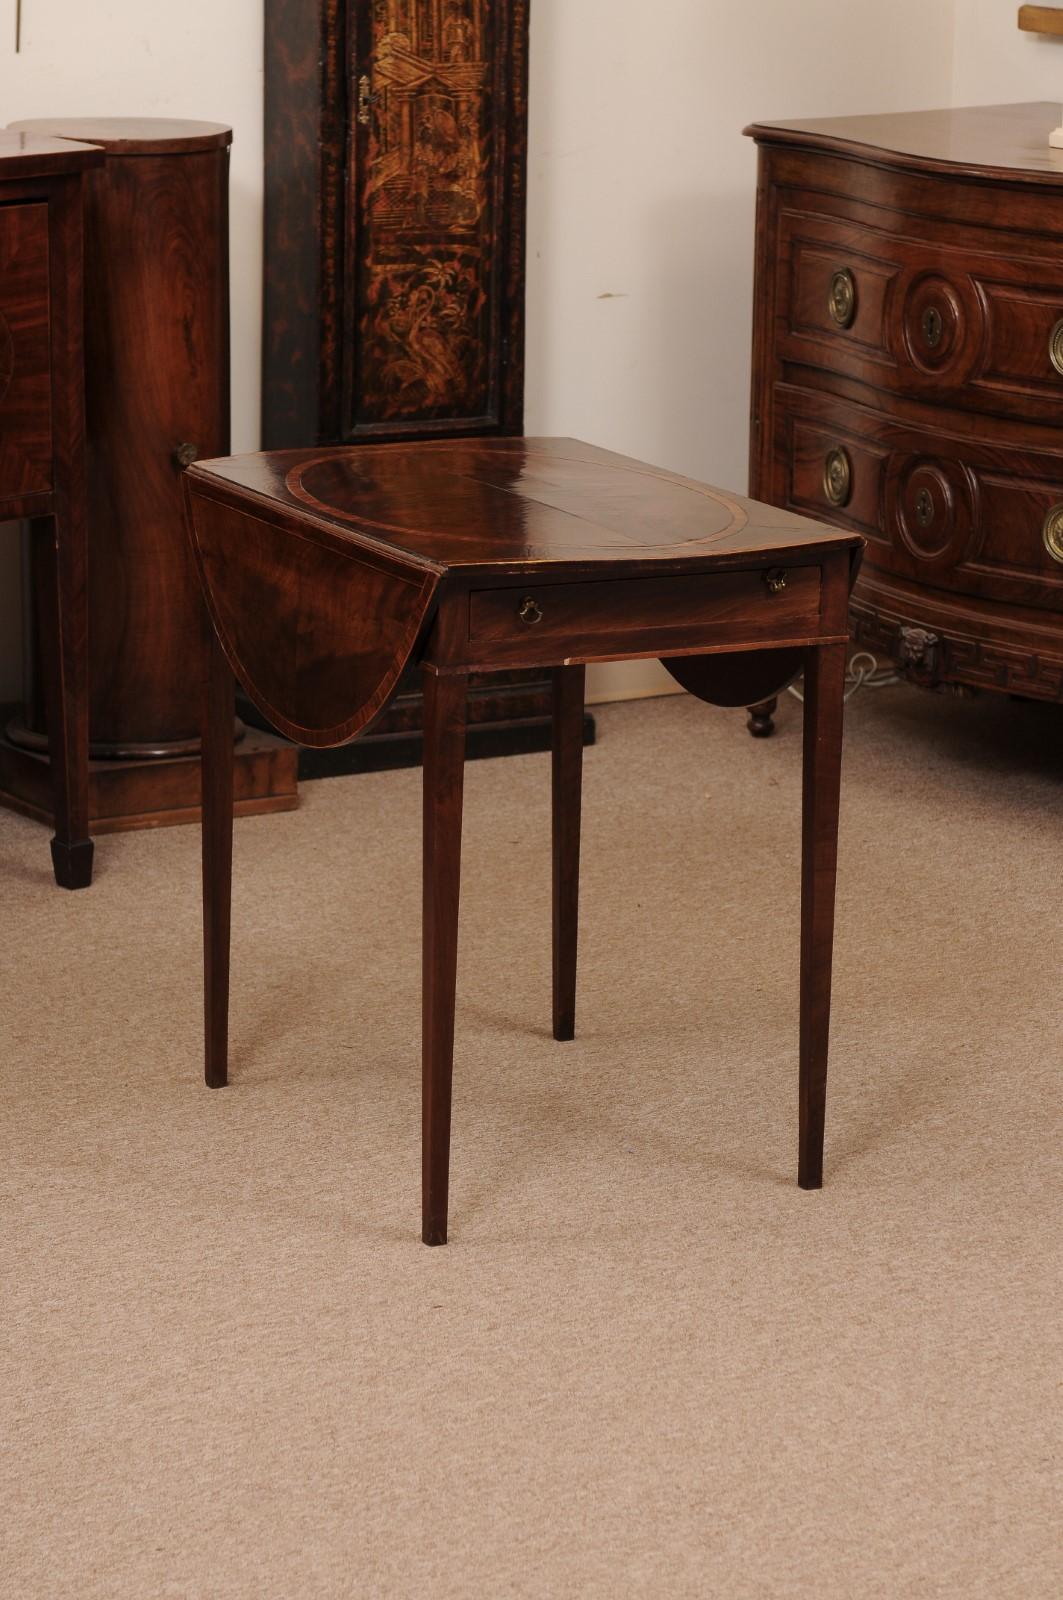 English George IIII Inlaid Mahogany Pembroke Table with 1 drawer & Oval Rosewood Cross-Banded Top, Ca. 1790